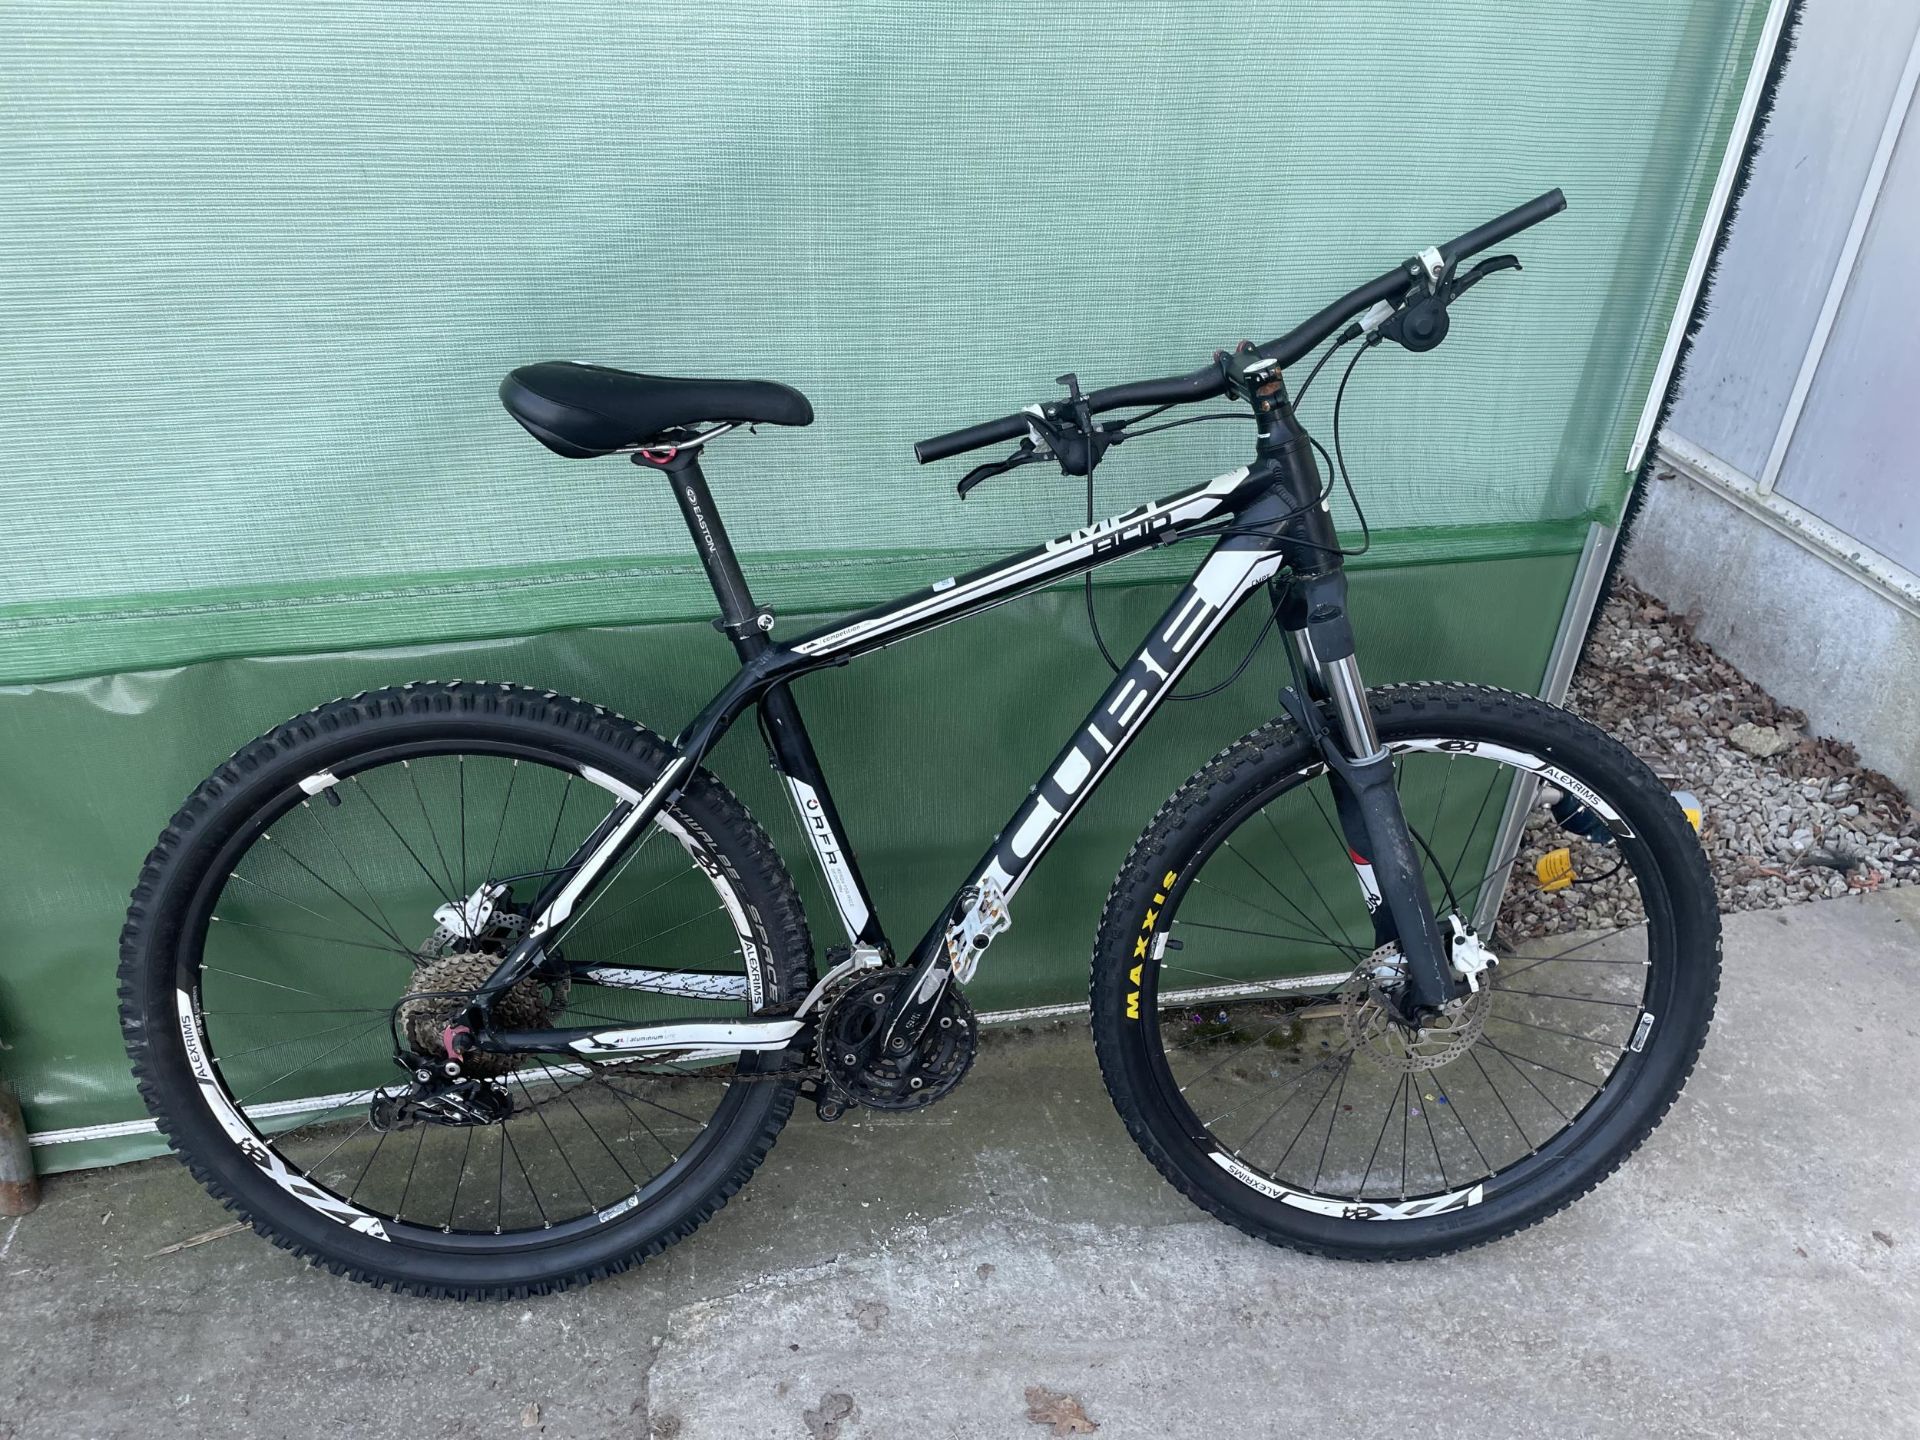 A CMPT CUBE MOUNTAIN BIKE WITH FRONT SUSPENSION AND 30 SPEED GEAR SYSTEM